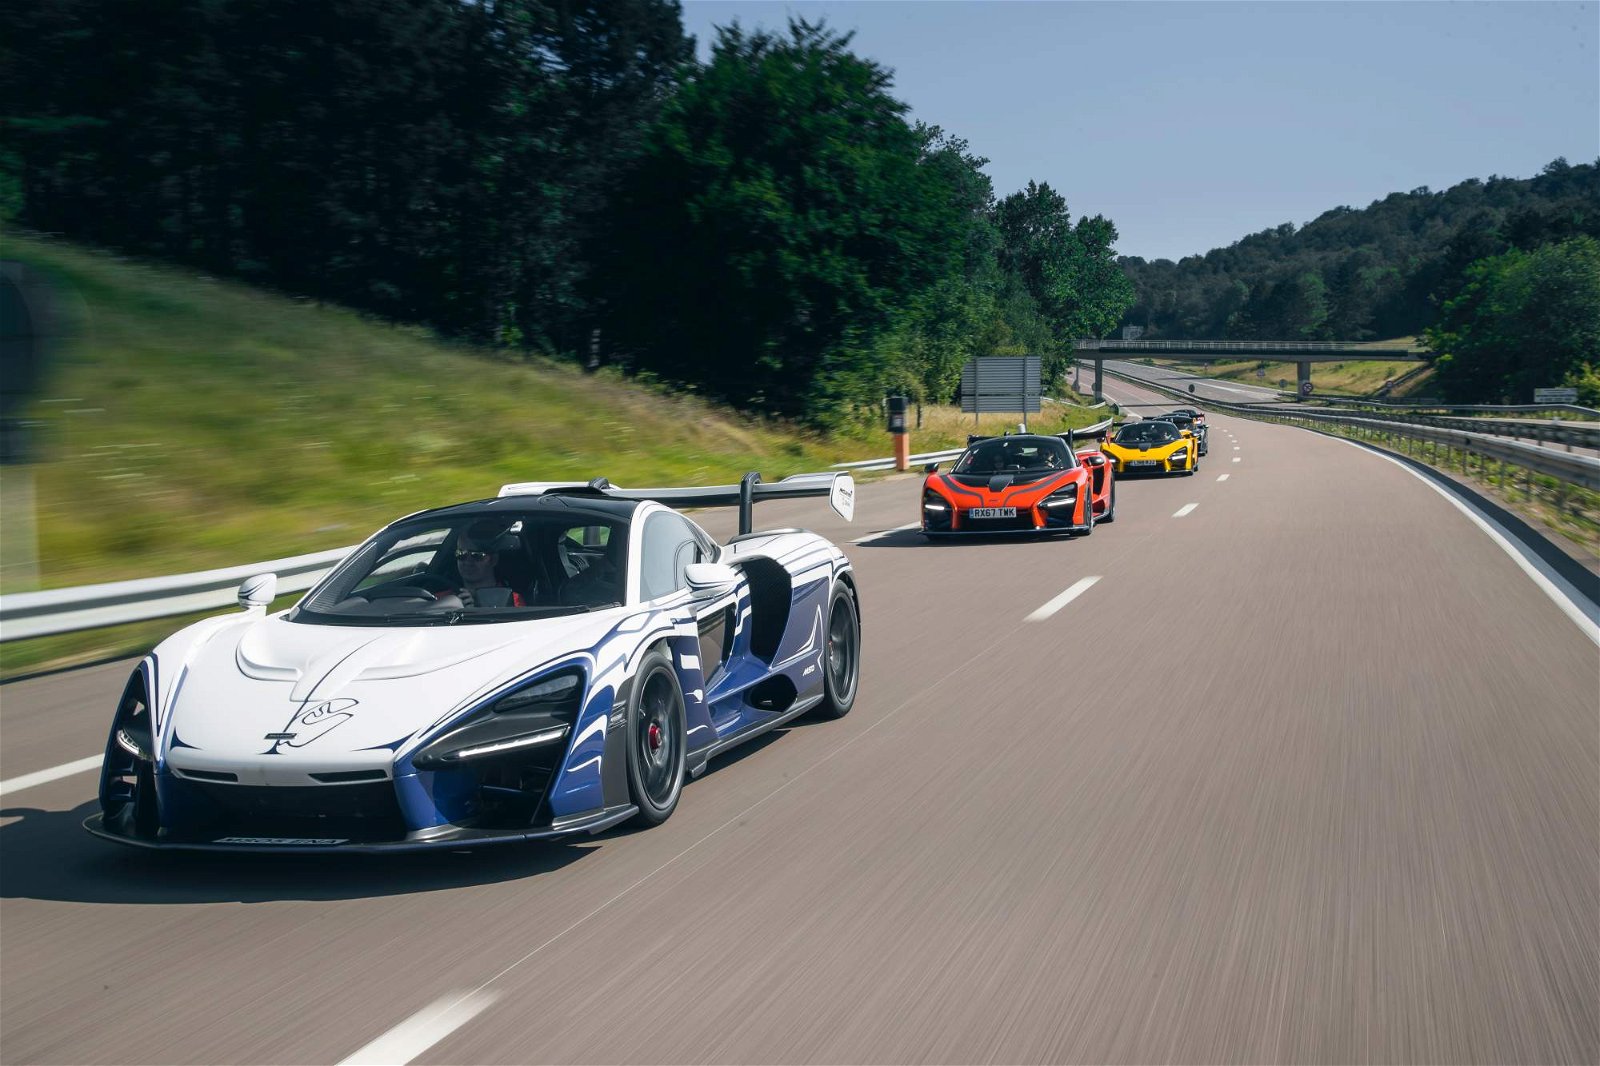 McLaren-Senna-chassis-001-on-maiden-road-trip-to-Paul-Ricard-circuit-7